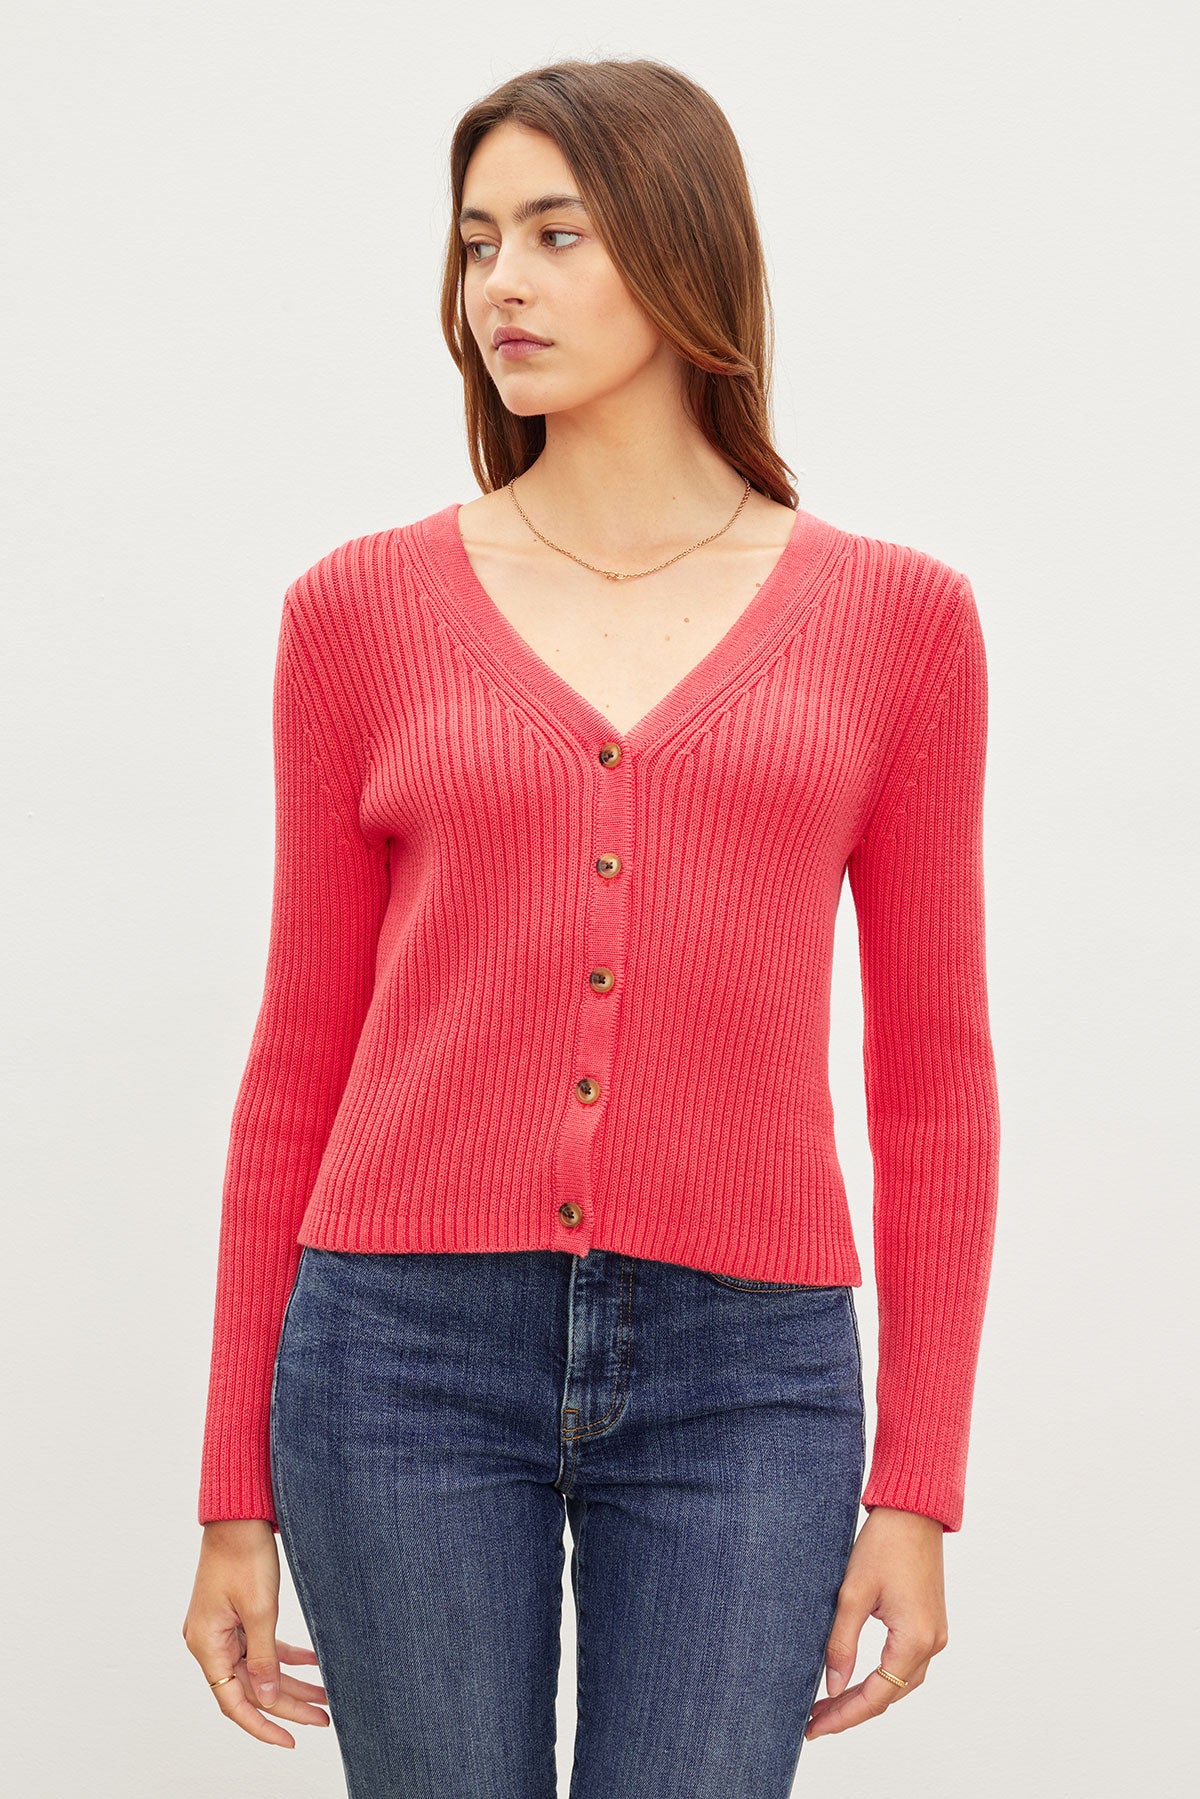 Woman in a red cotton ribbed knit HYDIE BUTTON FRONT CARDIGAN by Velvet by Graham & Spencer and blue jeans standing against a light background.-36387940368577